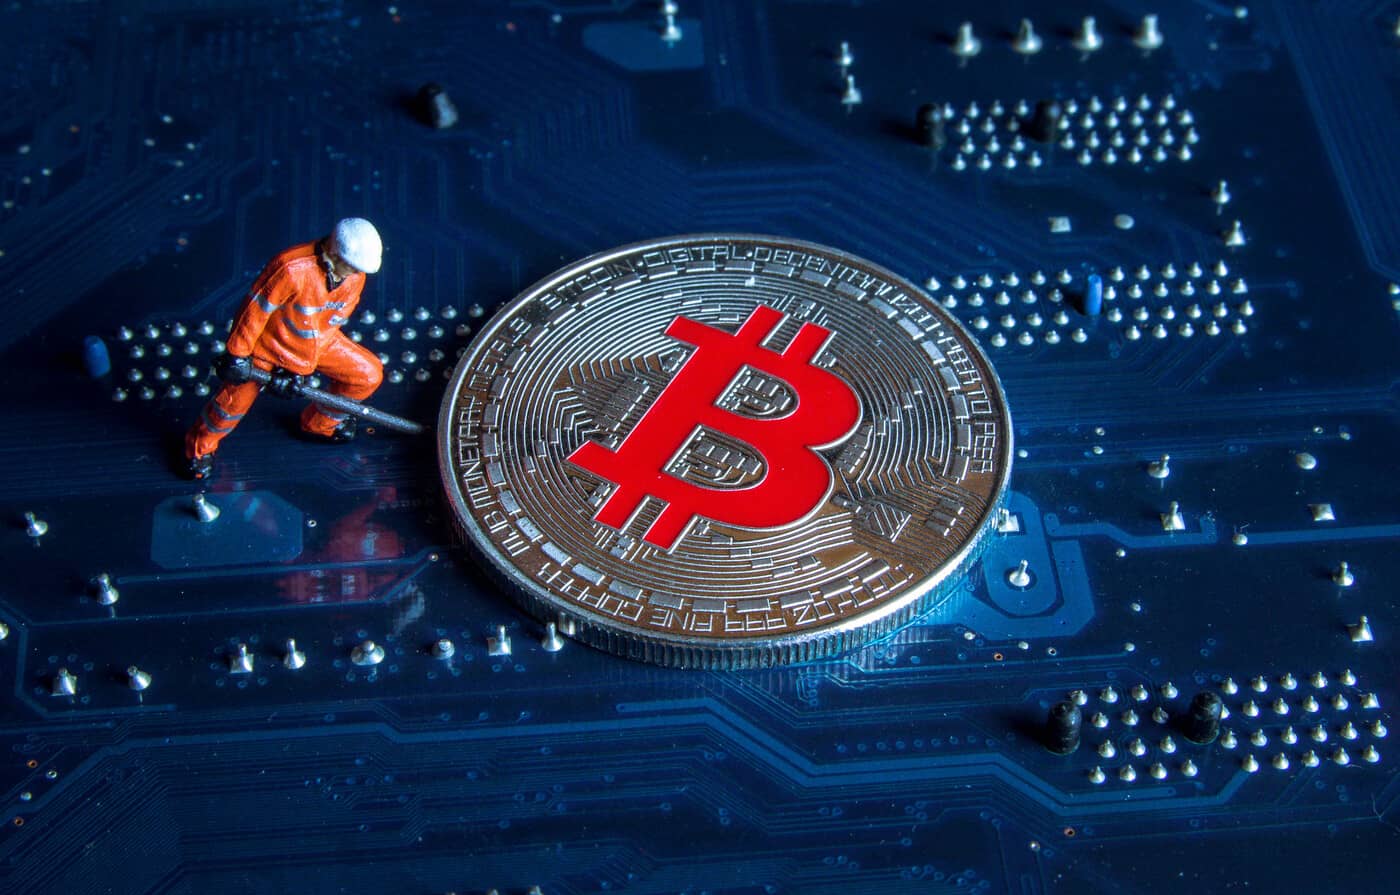 Swan Bitcoin Unveils New Mining Unit, With 750 BTC Mined Already